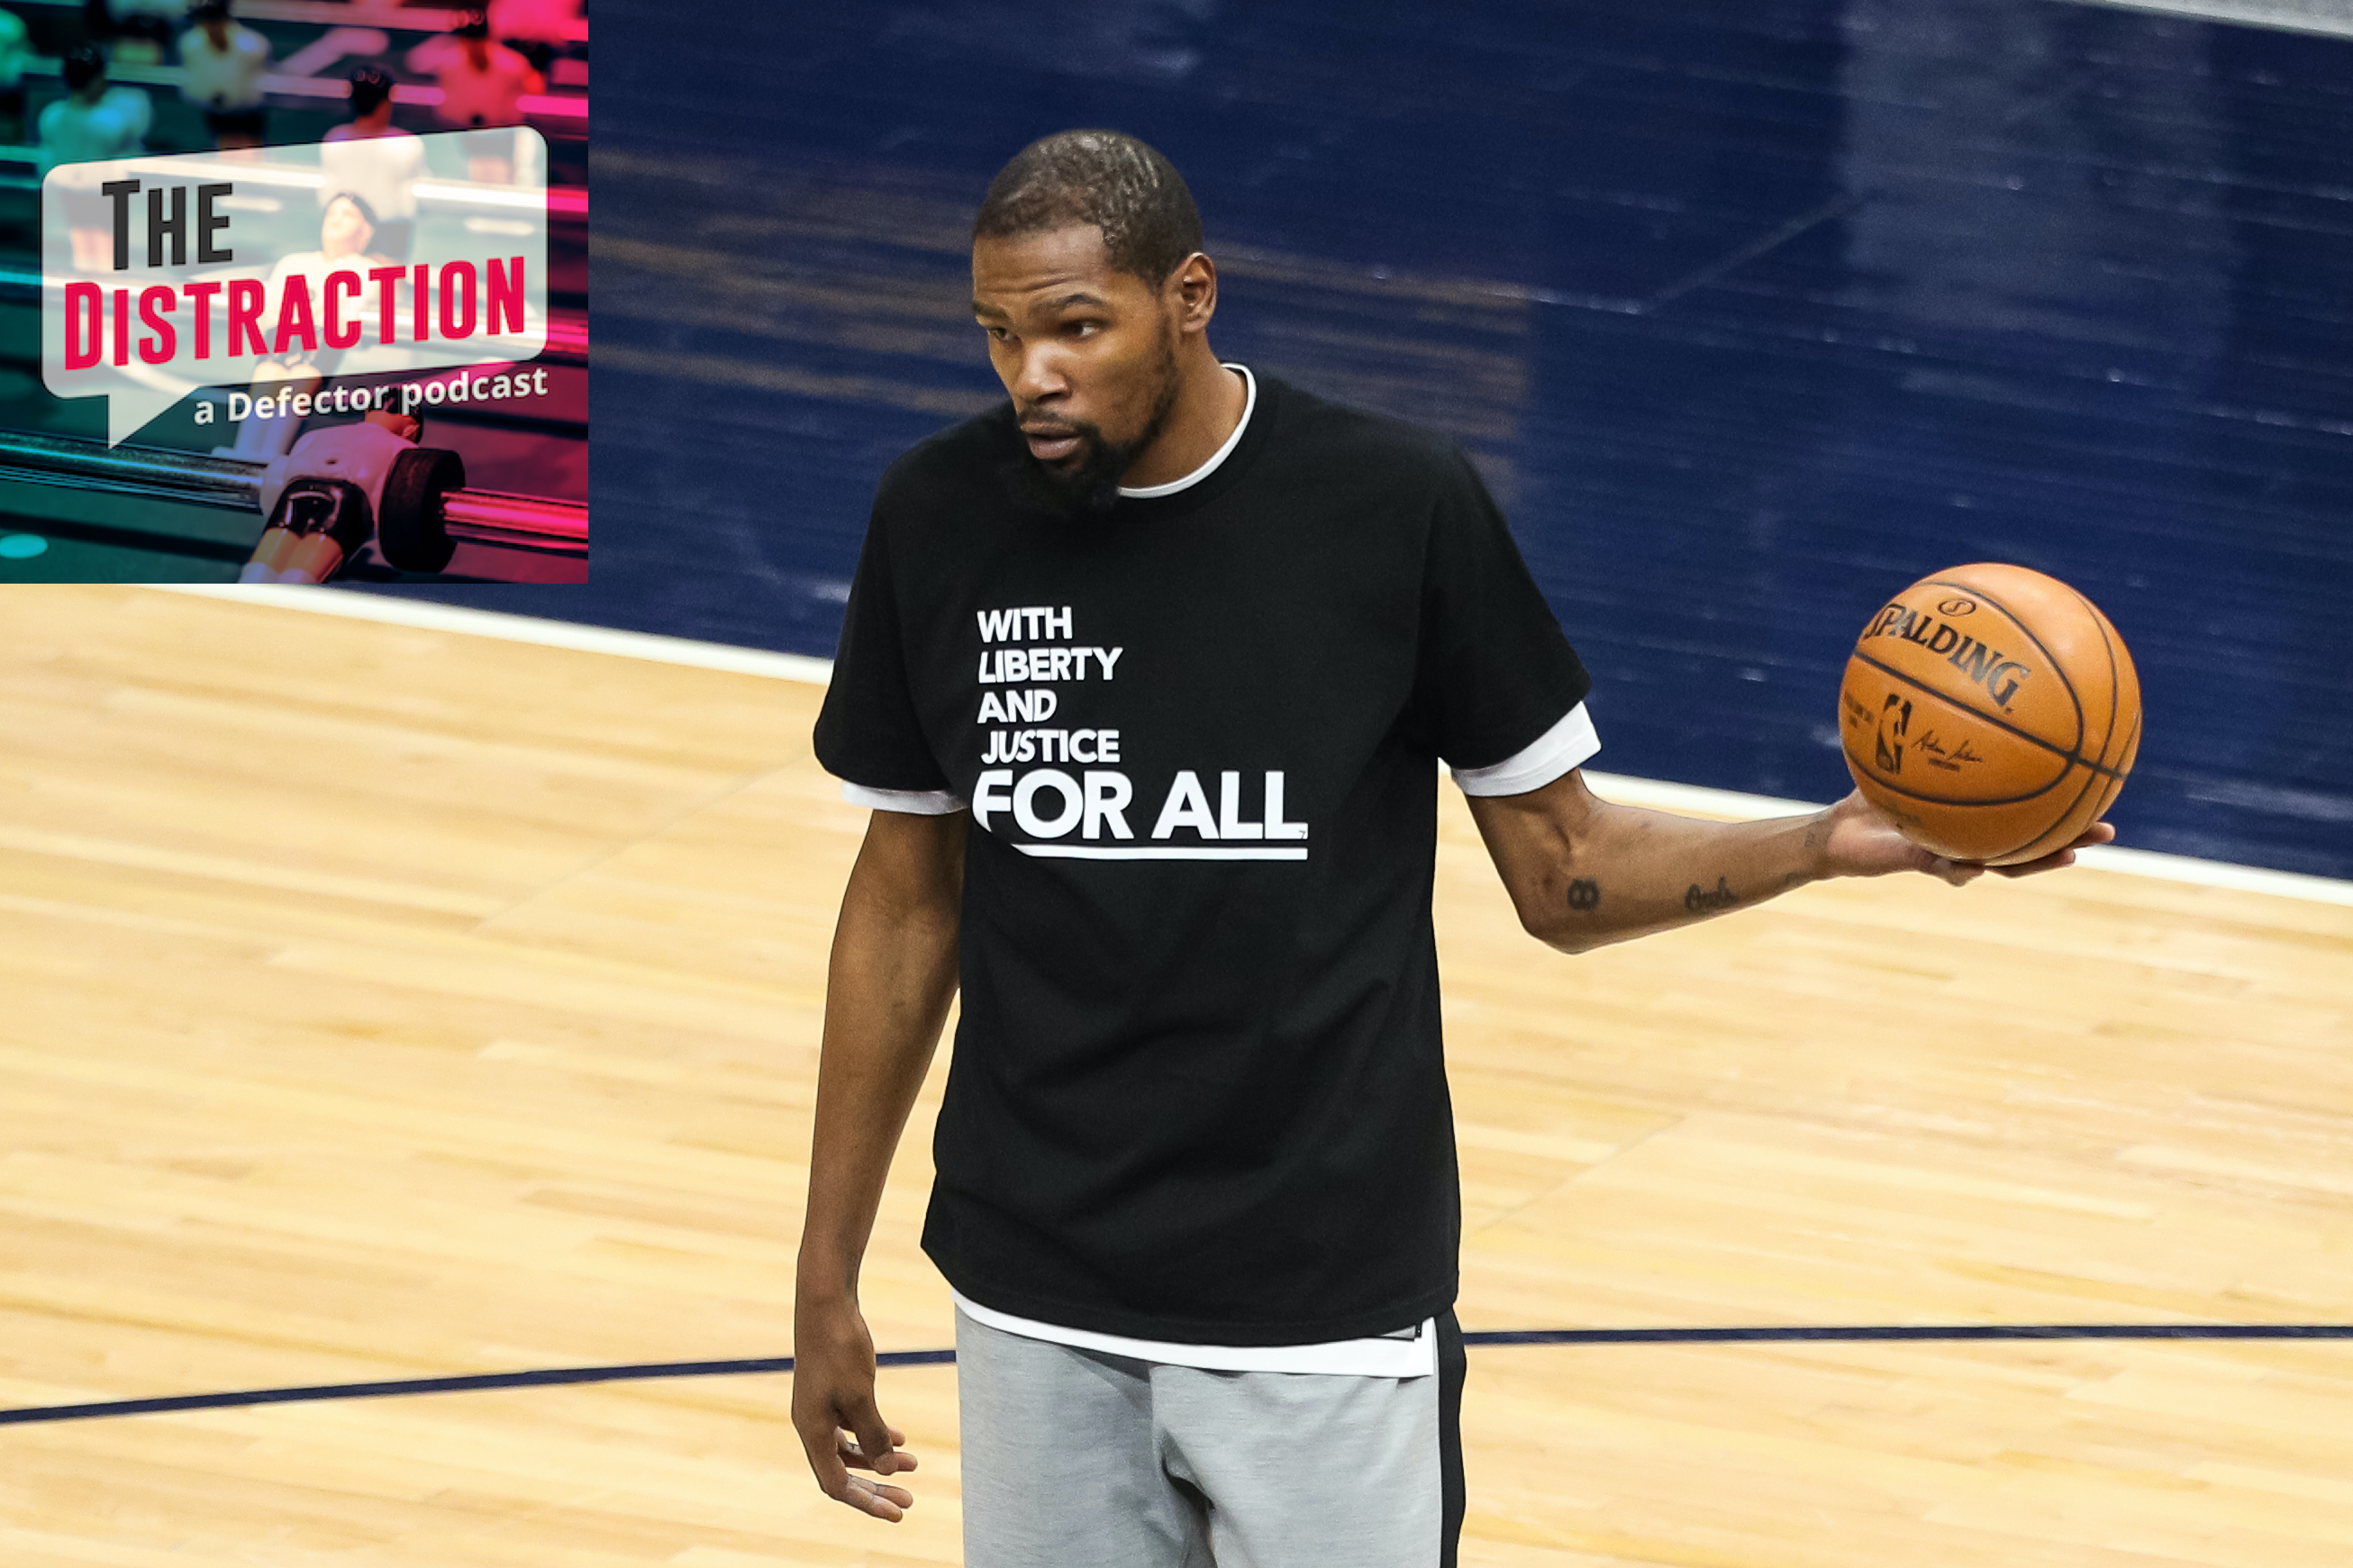 Kevin Durant warms up before Tuesday's game against the Timberwolves in a meaningful t-shirt.